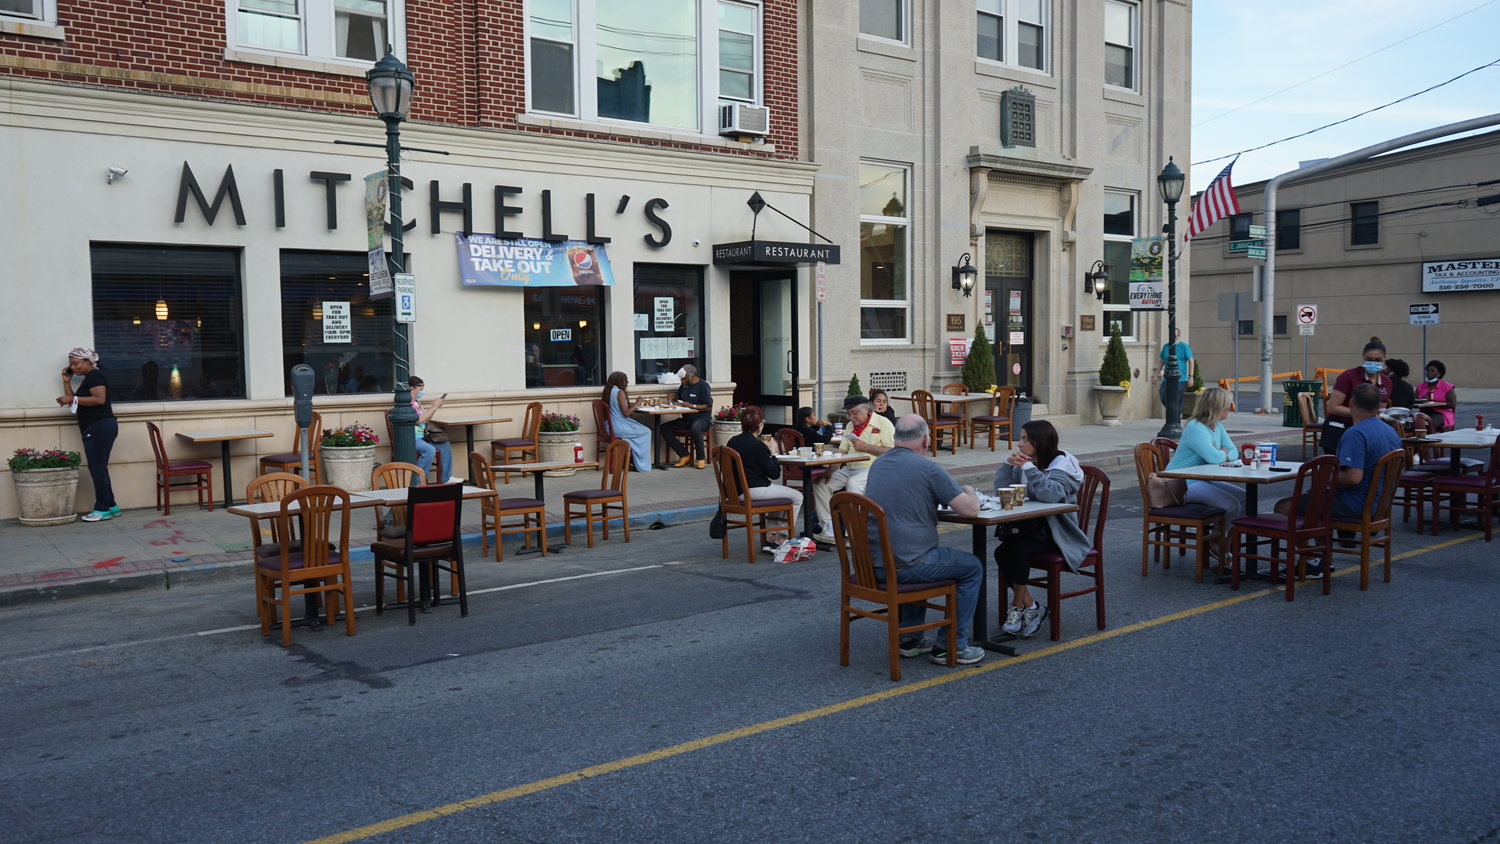 Mitchell’s Restaurant, on Rockaway Avenue, took advantage of on-street dining during the summer, but with the winter months approaching, its customers have been driven indoors, where capacity is limited to 50 percent.